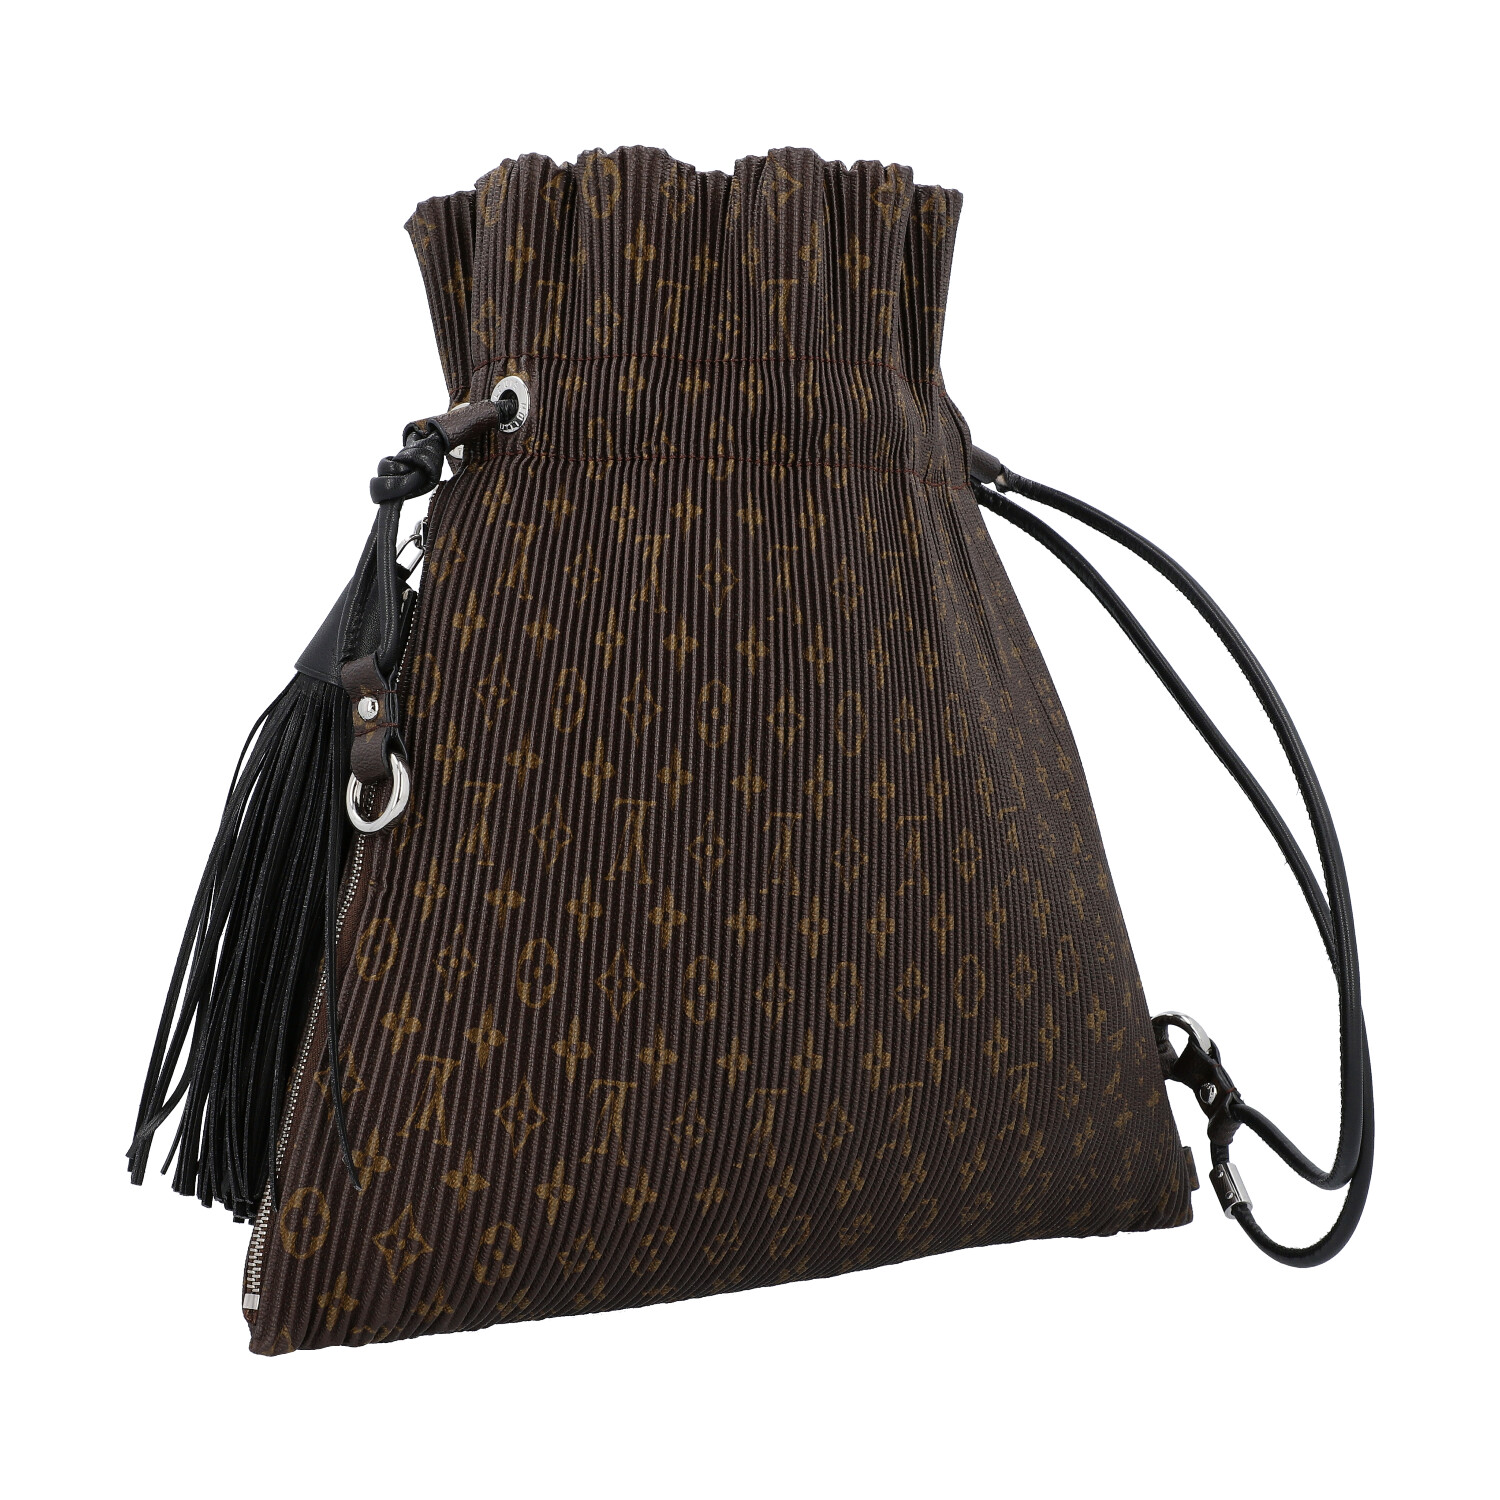 LOUIS VUITTON Beuteltasche "PLEATED EXPLORER BAG", Koll. Spring 2016 Ready to wear collection.NP. - Image 2 of 8